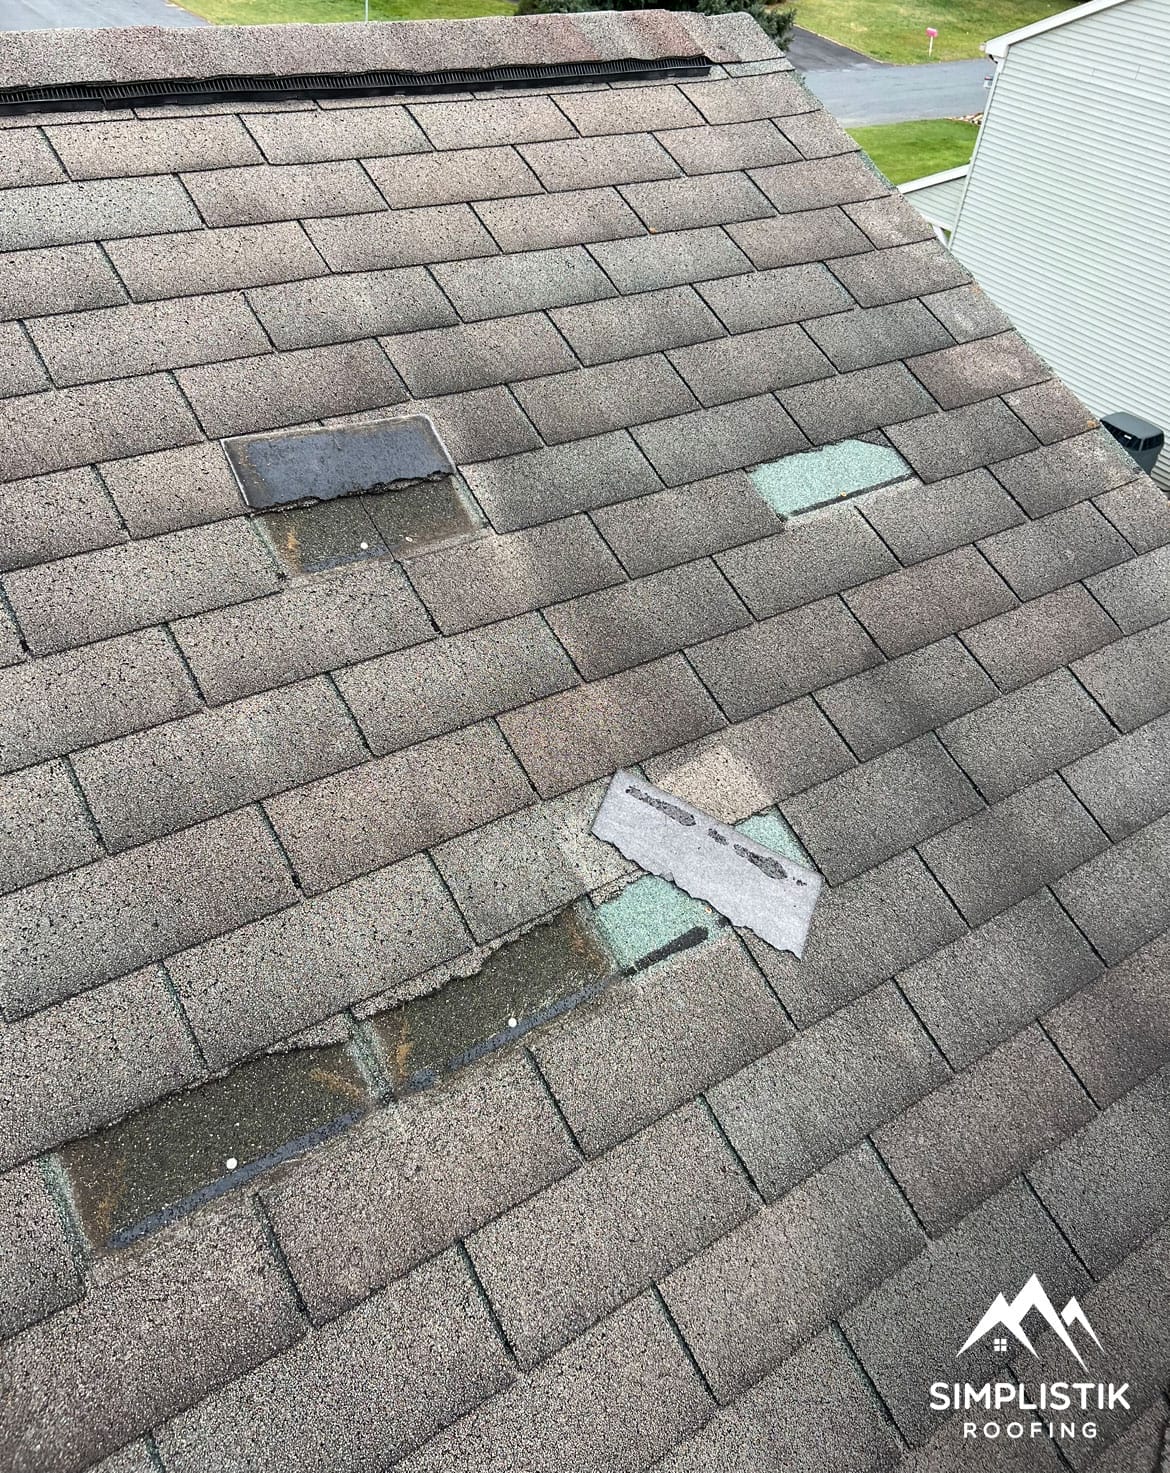 Storm damage to roof - Example 3